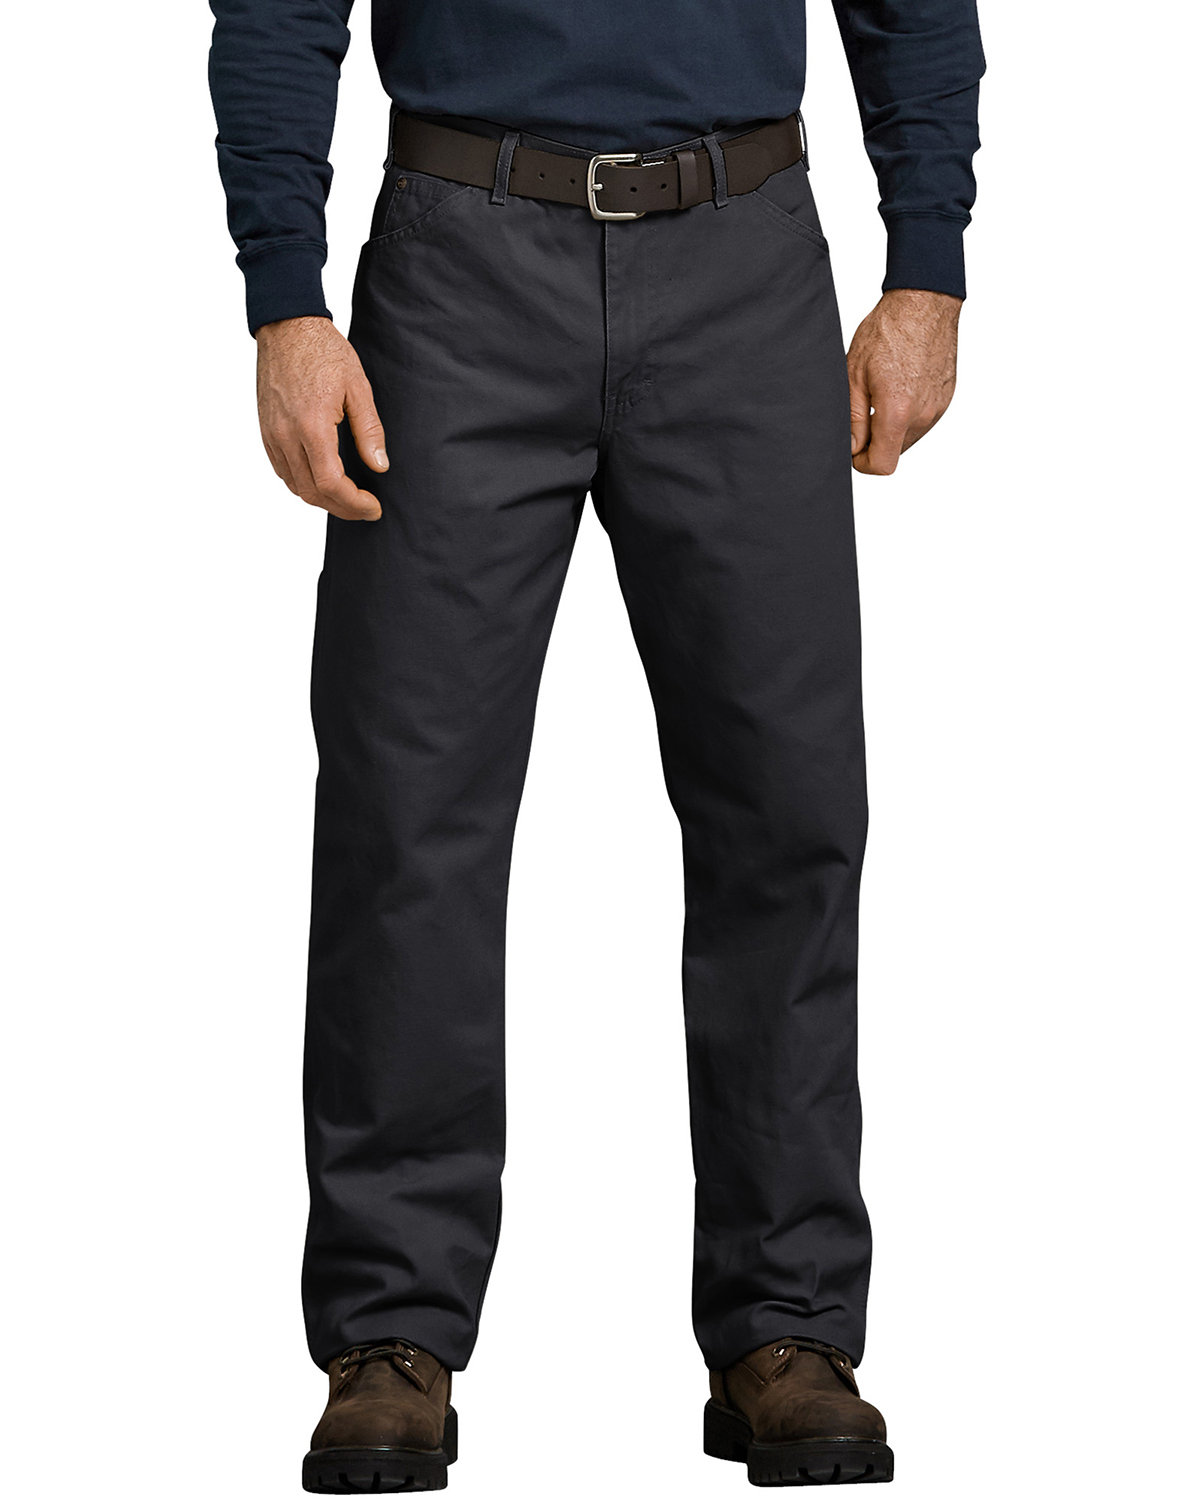 Unisex Relaxed Fit Straight Leg Carpenter Duck Jean Pant-